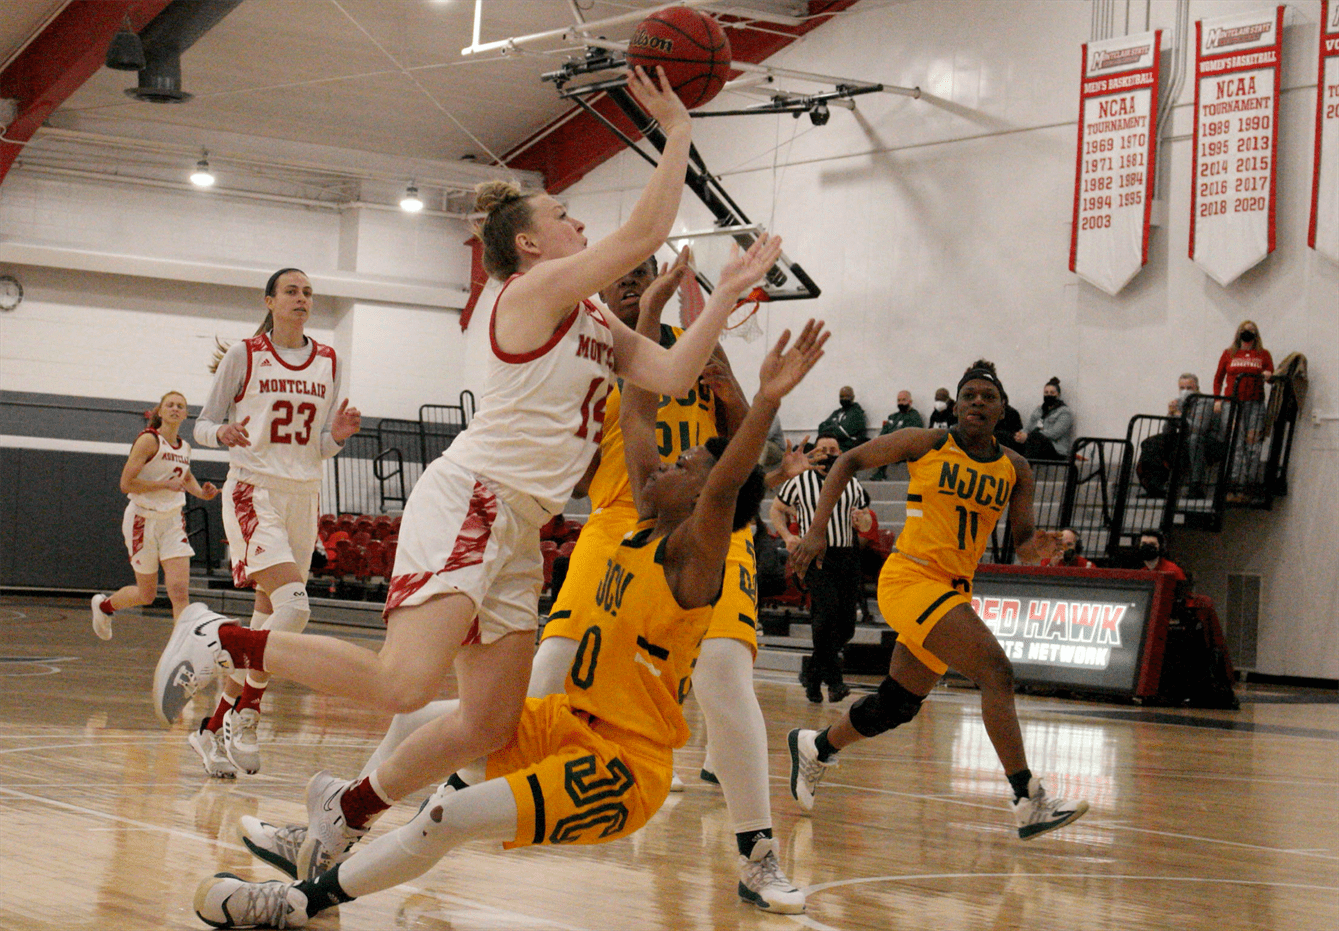 Junior guard Nickie Carter slams into an NJCU defender as she attempts a shot close to the rim. Photo courtesy of Caitlyn Hughes